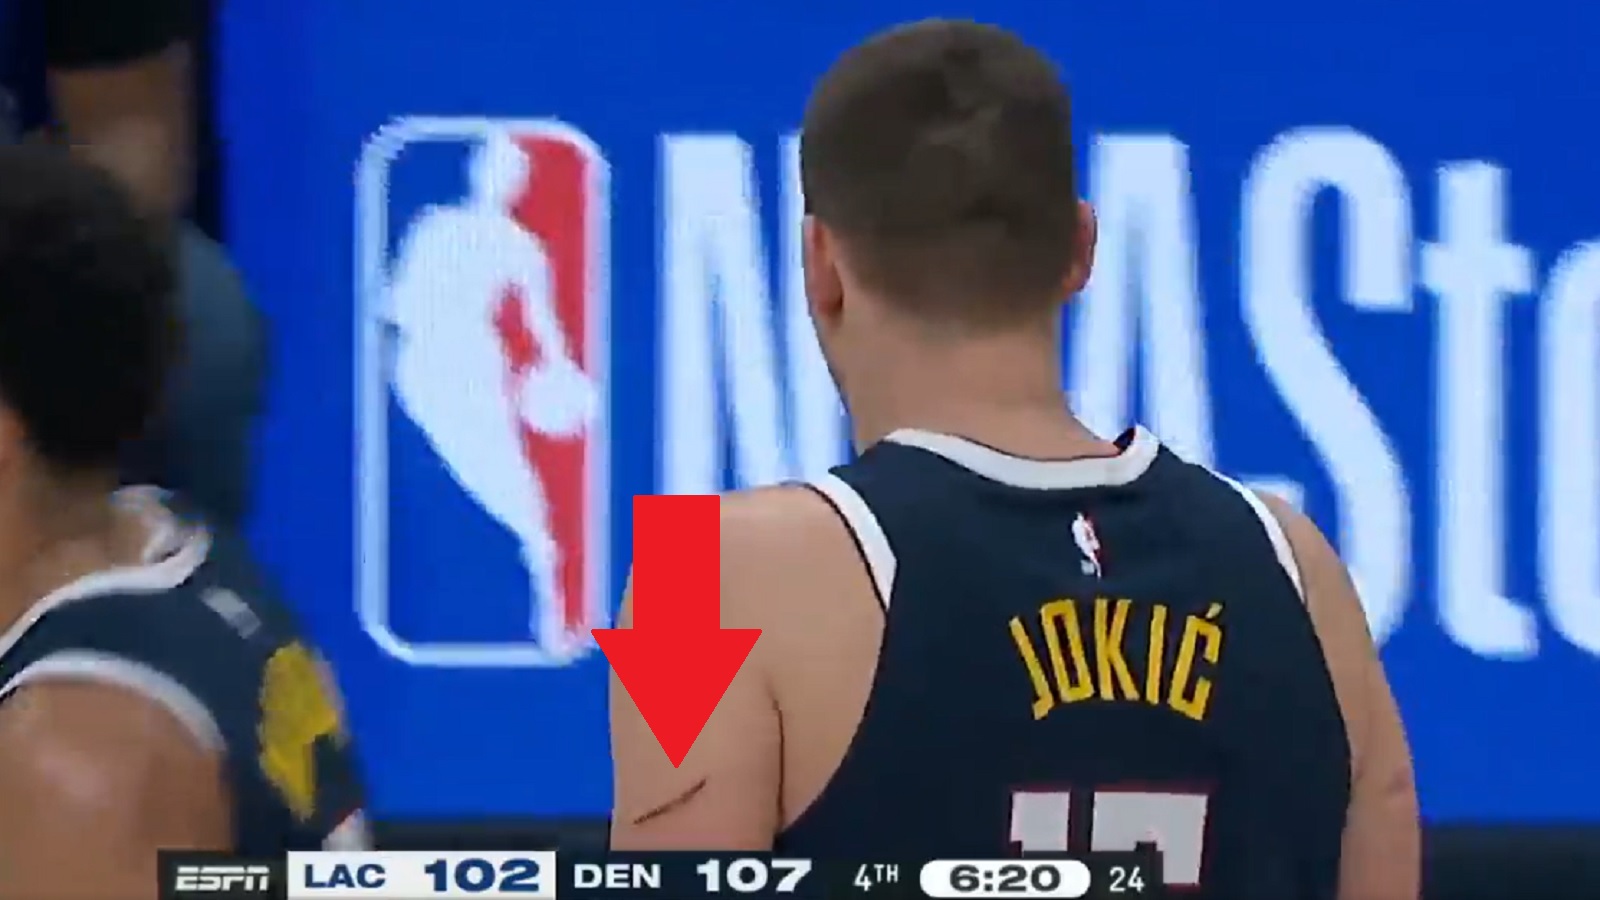 Nikola Jokic plays with scratched up arms against Clippers